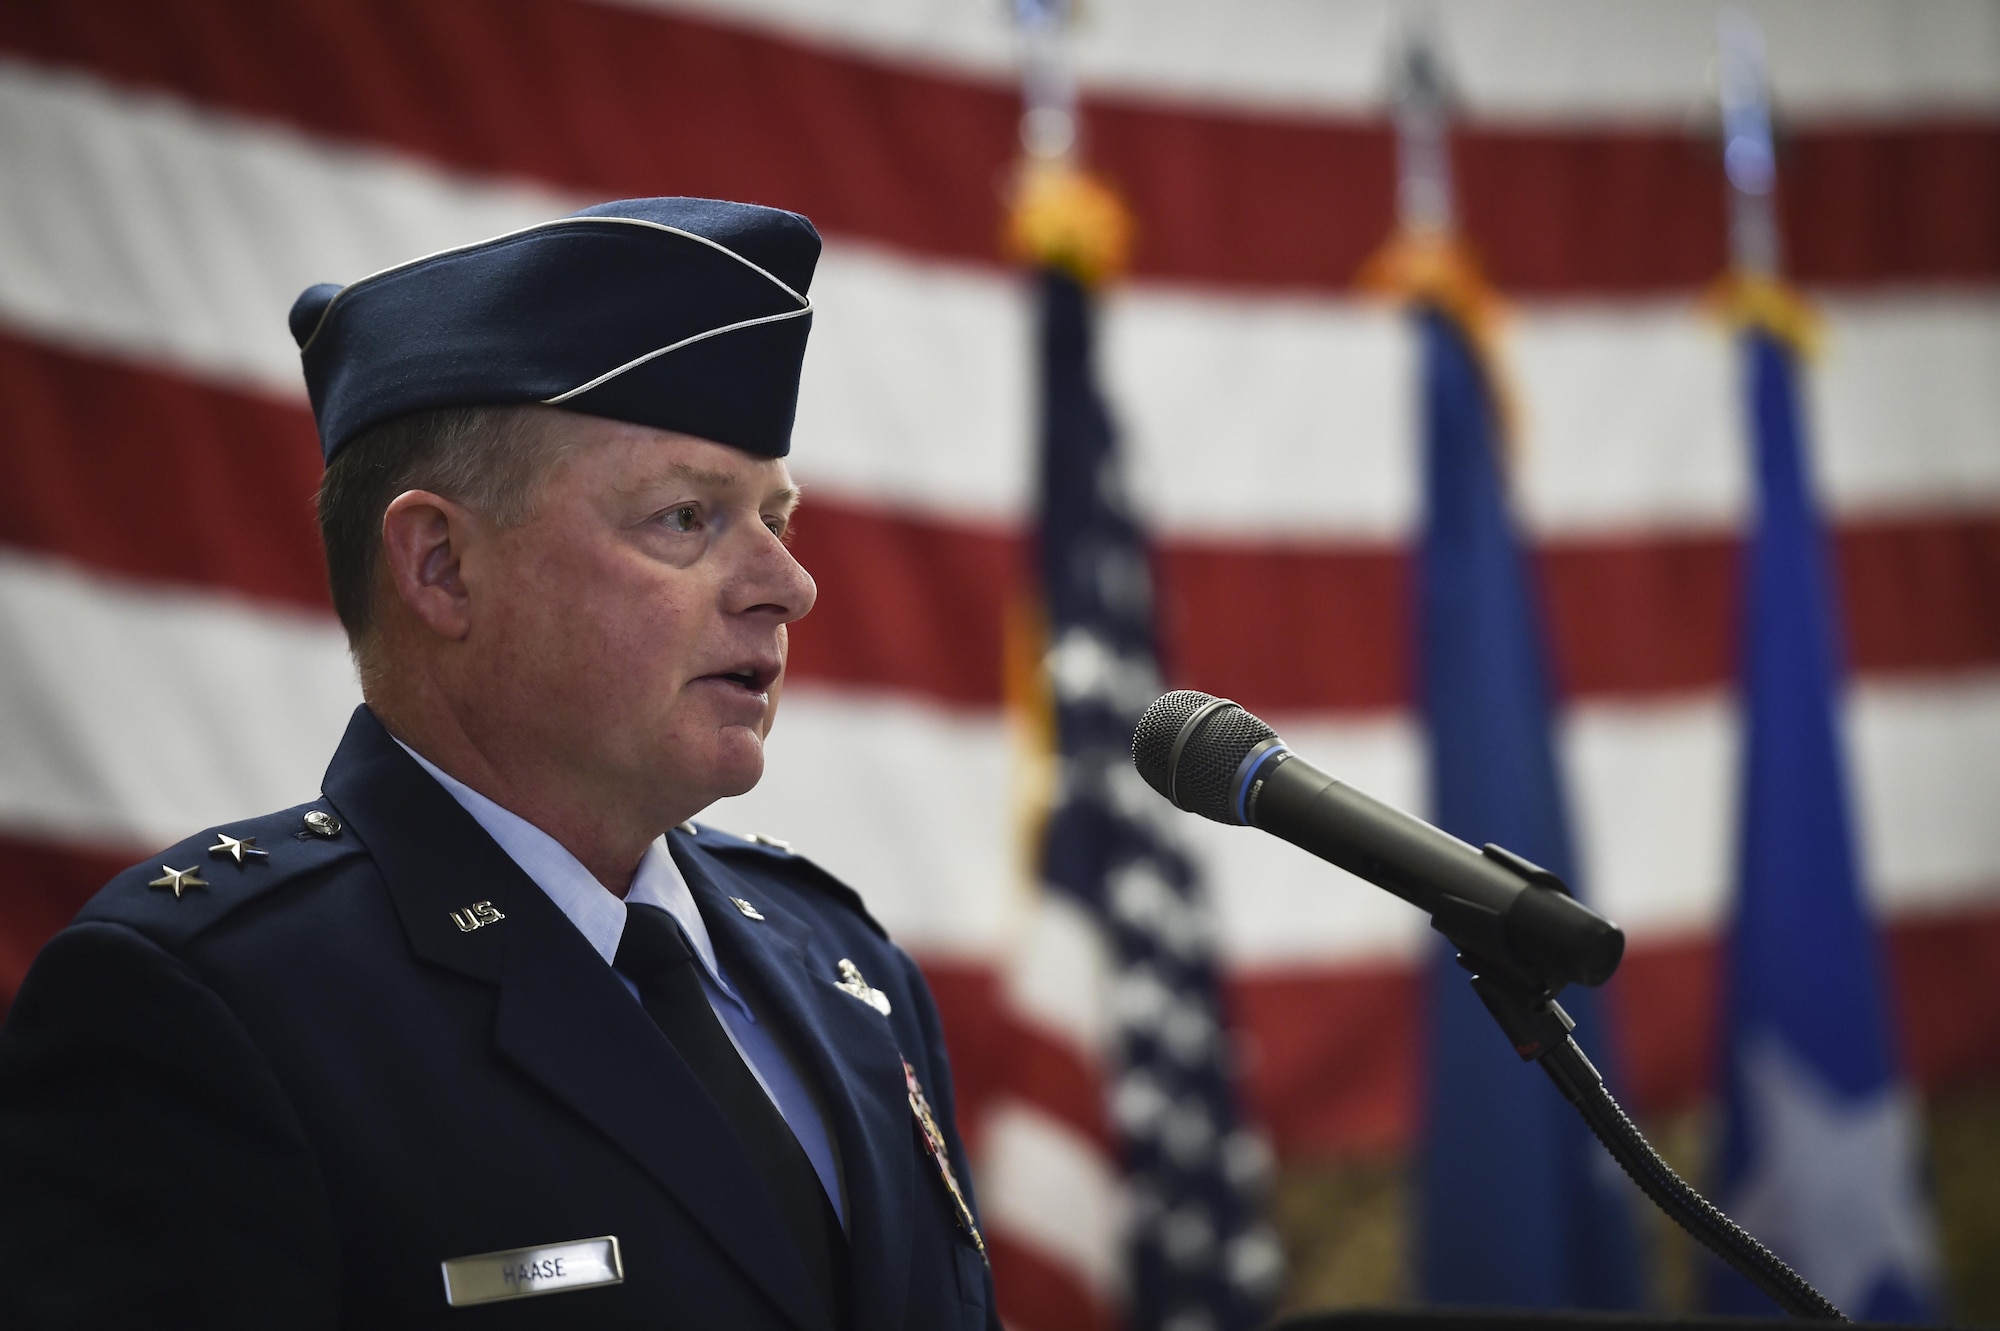 Maj. Gen. Eugene Haase, vice commander of Air Force Special Operations Command, speaks during a Silver Star Medal presentation ceremony for Staff Sgt. Keaton Thiem, a combat controller, at Joint Base Lewis-McChord, Wash., Nov. 16, 2016. Thiem used air power to ensure the safety of his 100-plus man SOF element during a 14-hour firefight with no regard for his own personal safety, while deployed with U.S. Army Special Operations Forces in Afghanistan. (U.S. Air Force photo by Senior Airman Ryan Conroy)